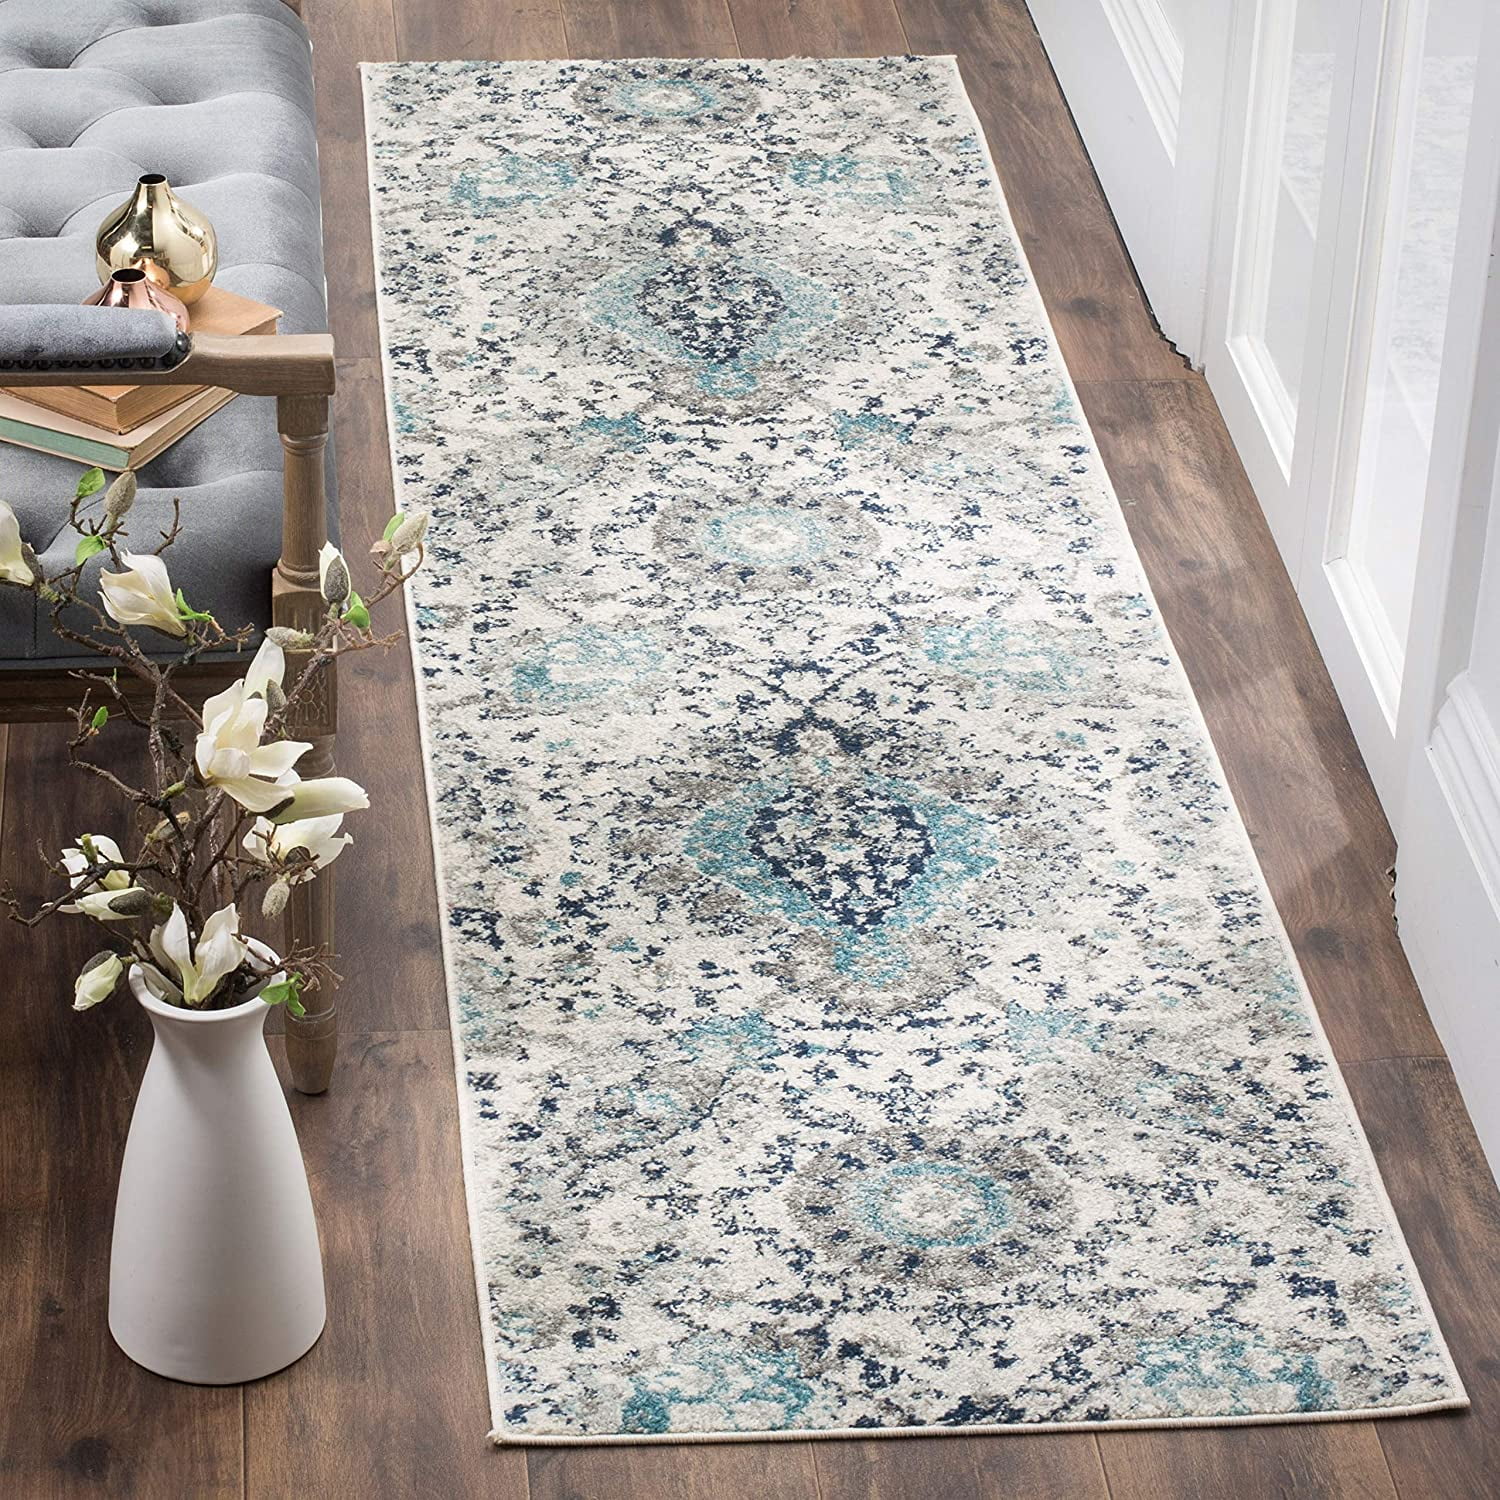 2' x 8' Blue SAFAVIEH Madison Collection MAD924F Oriental Boho Chic Distressed Non-Shedding Living Room Entryway Foyer Hallway Bedroom Runner Light Grey 